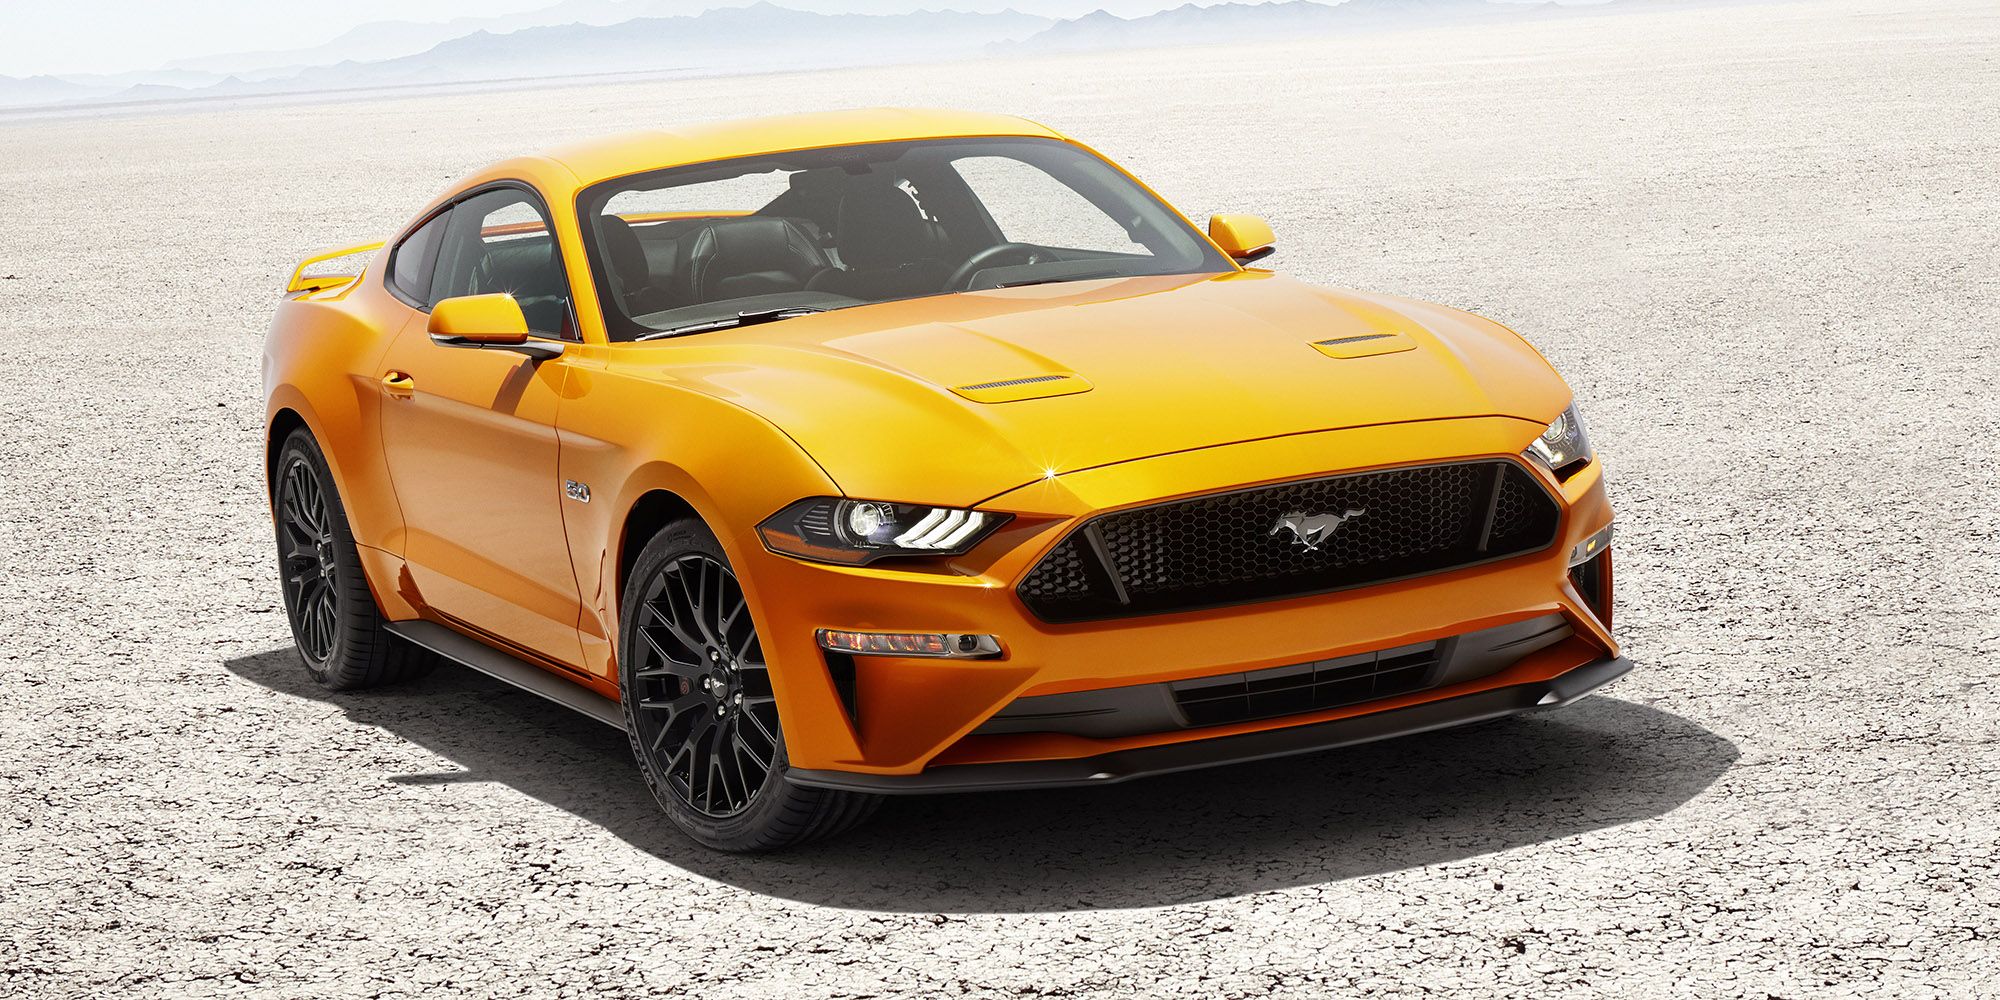 2018 Ford Mustang Price Starts at $25,585 - MSRP For Mustang EcoBoost & GT